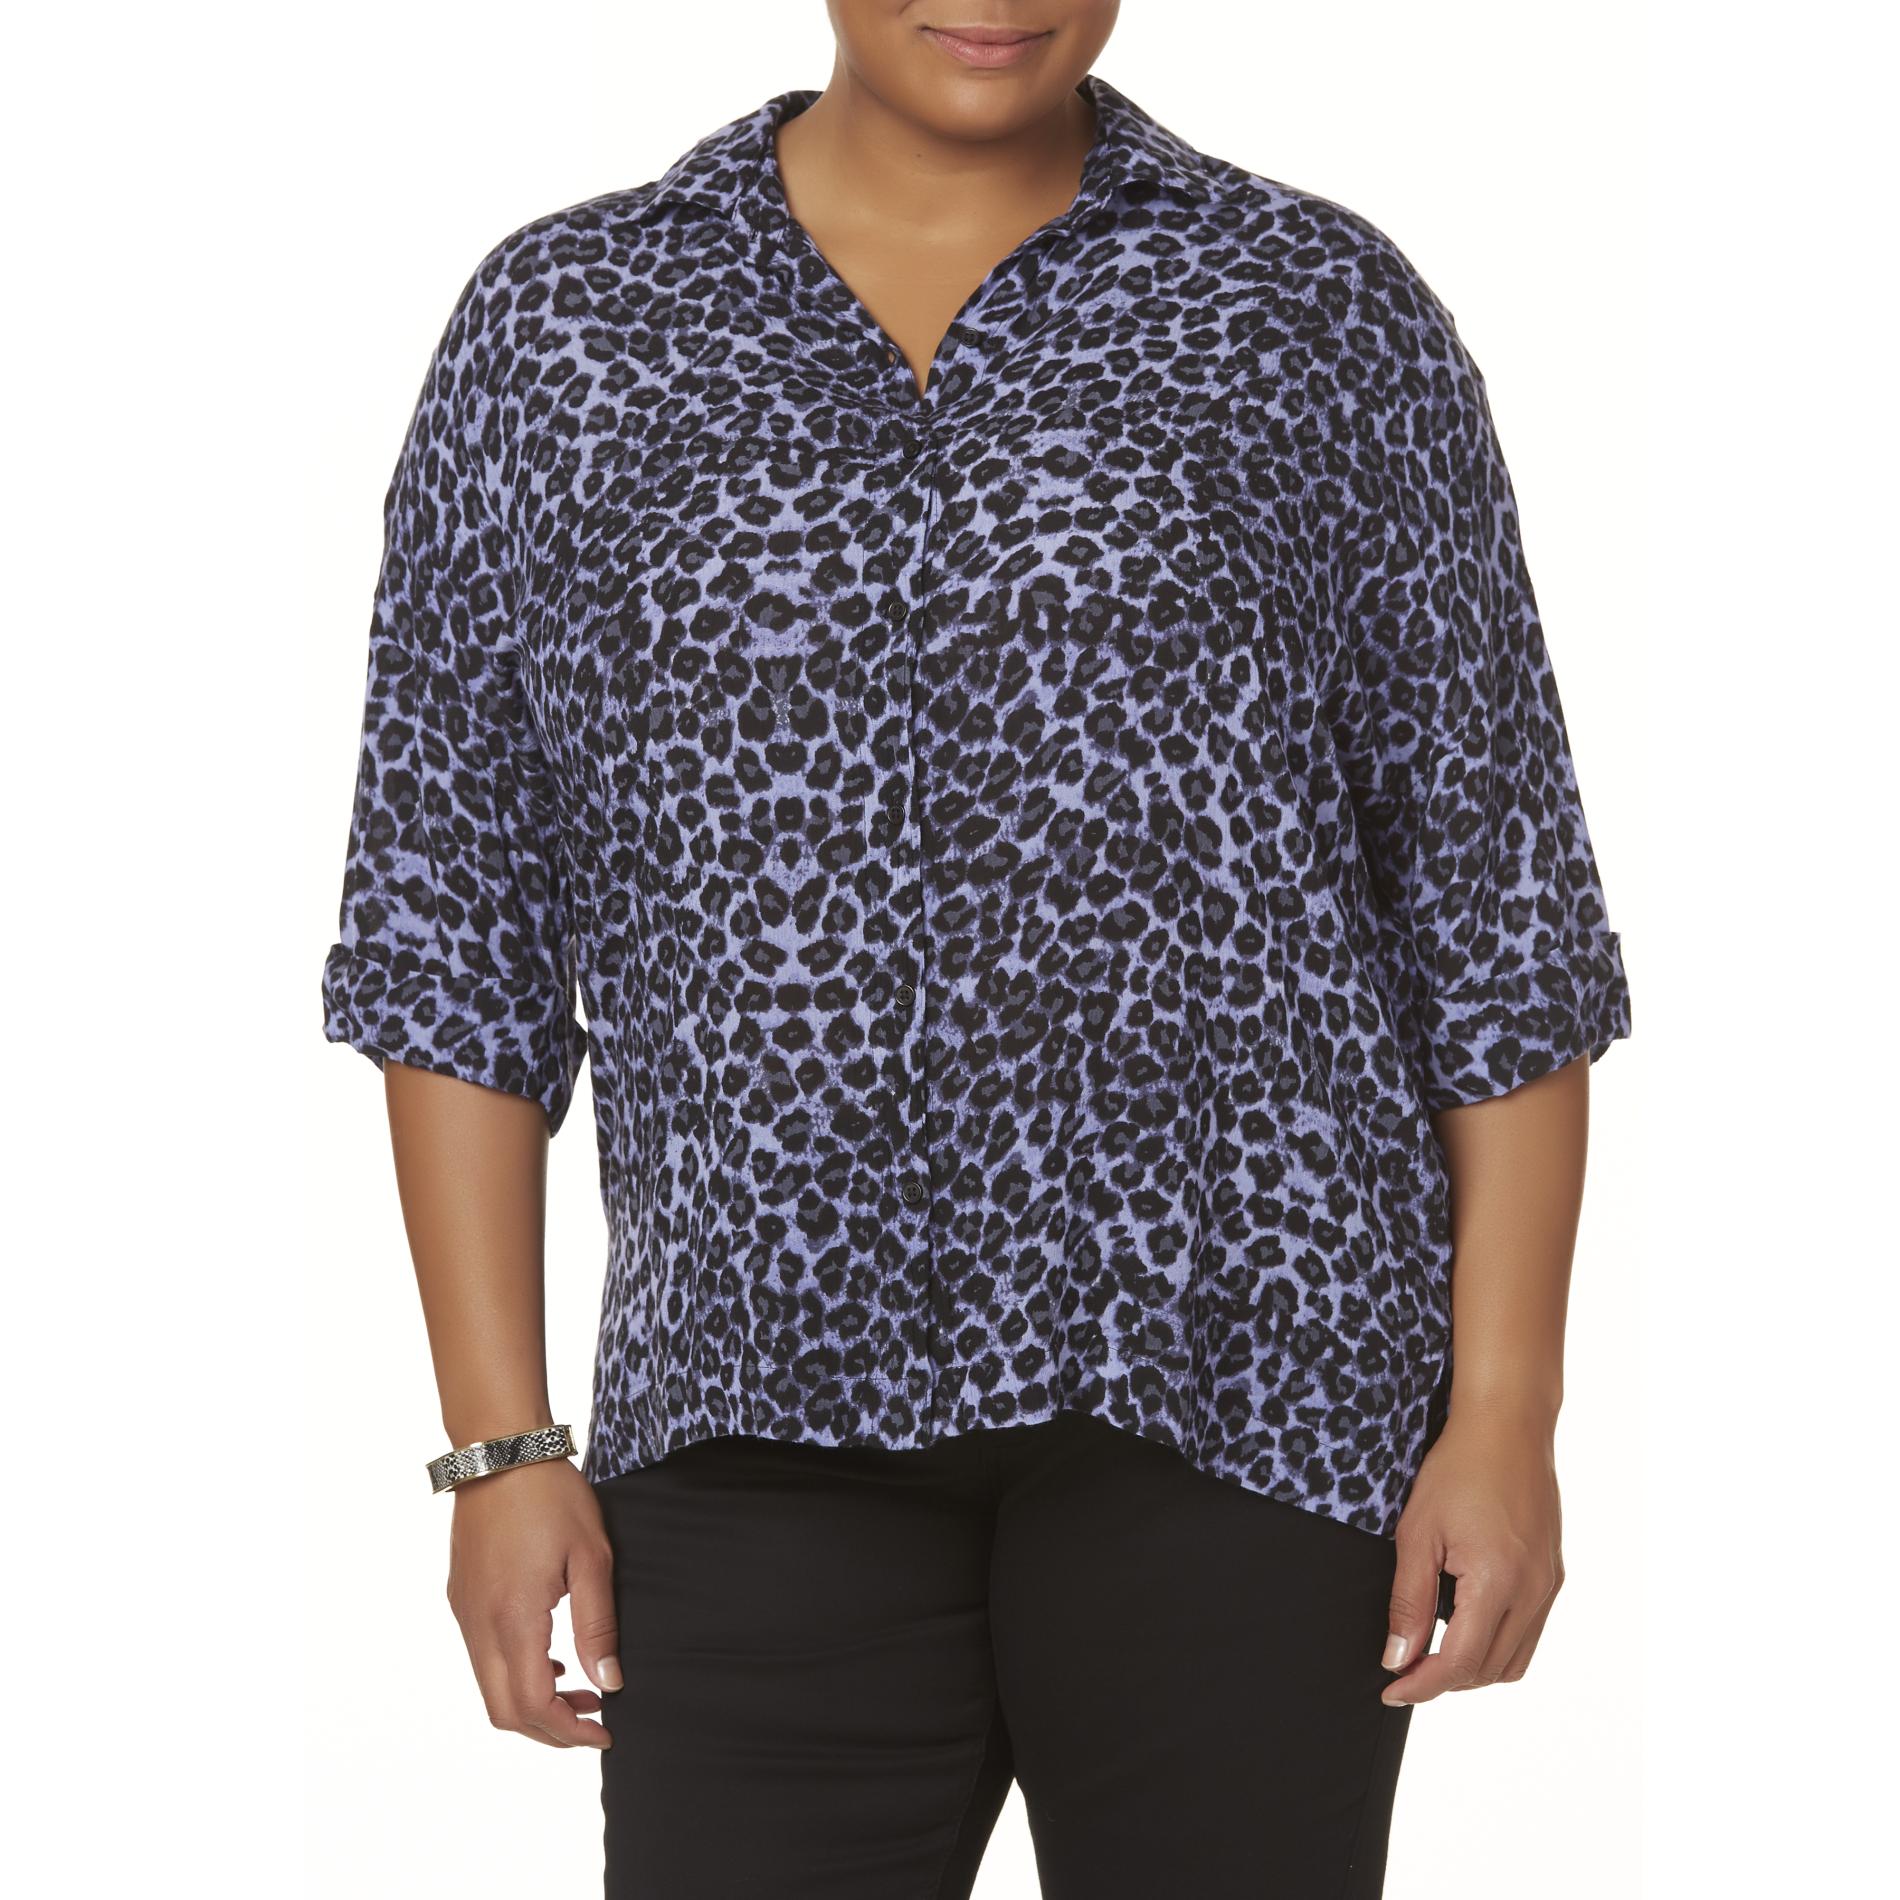 Attention Women's Plus High-Low Top - Animal Print